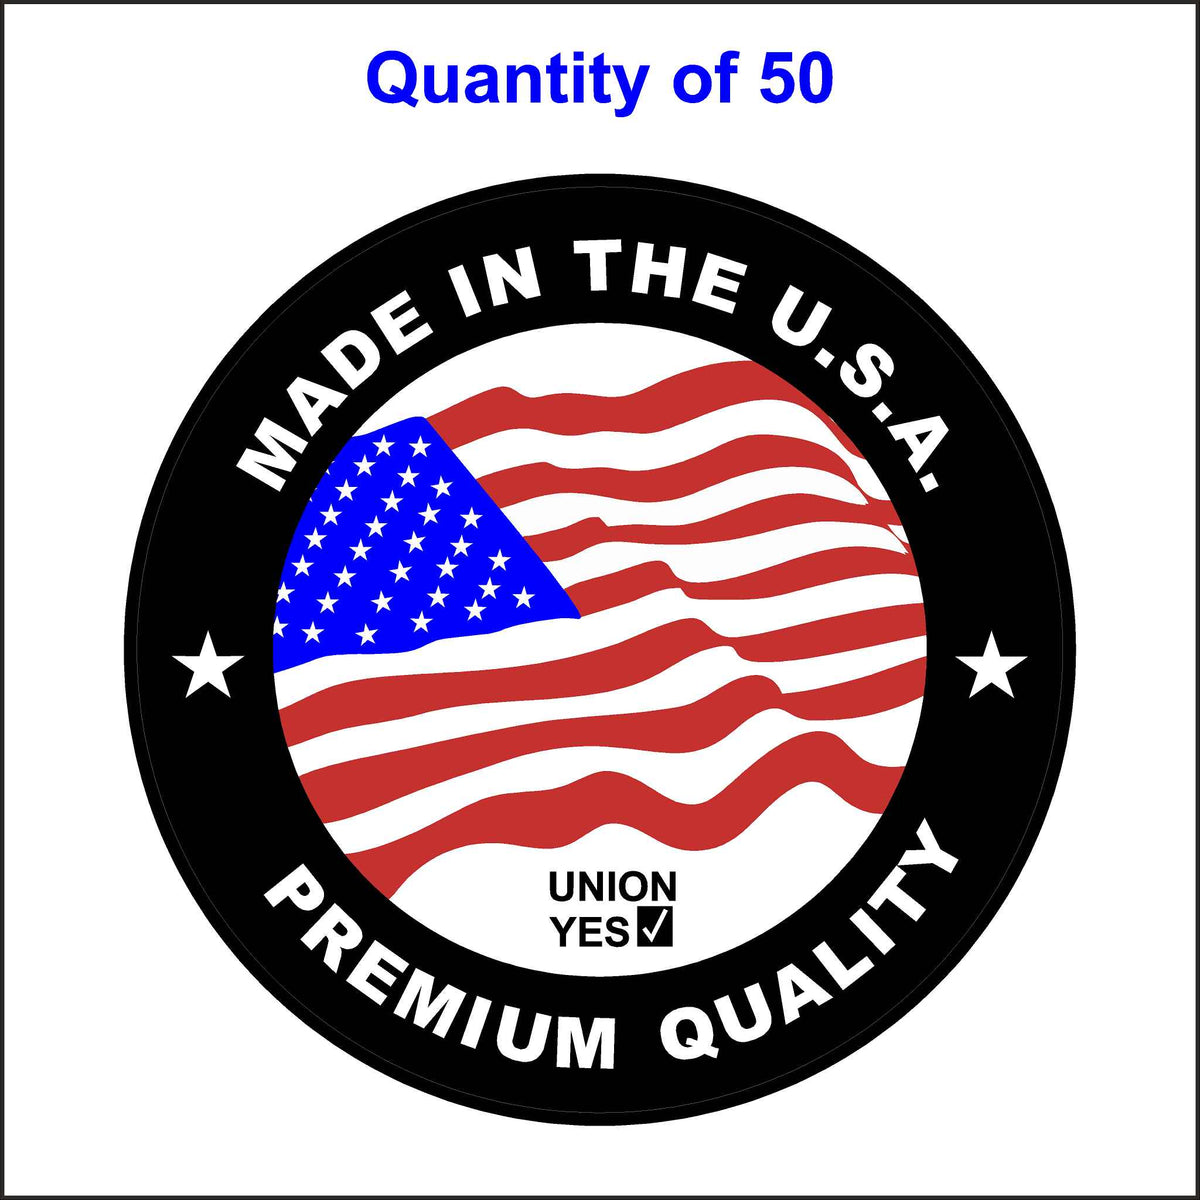 Made in the USA Premium Quality Union Stickers. 50 Quantity.